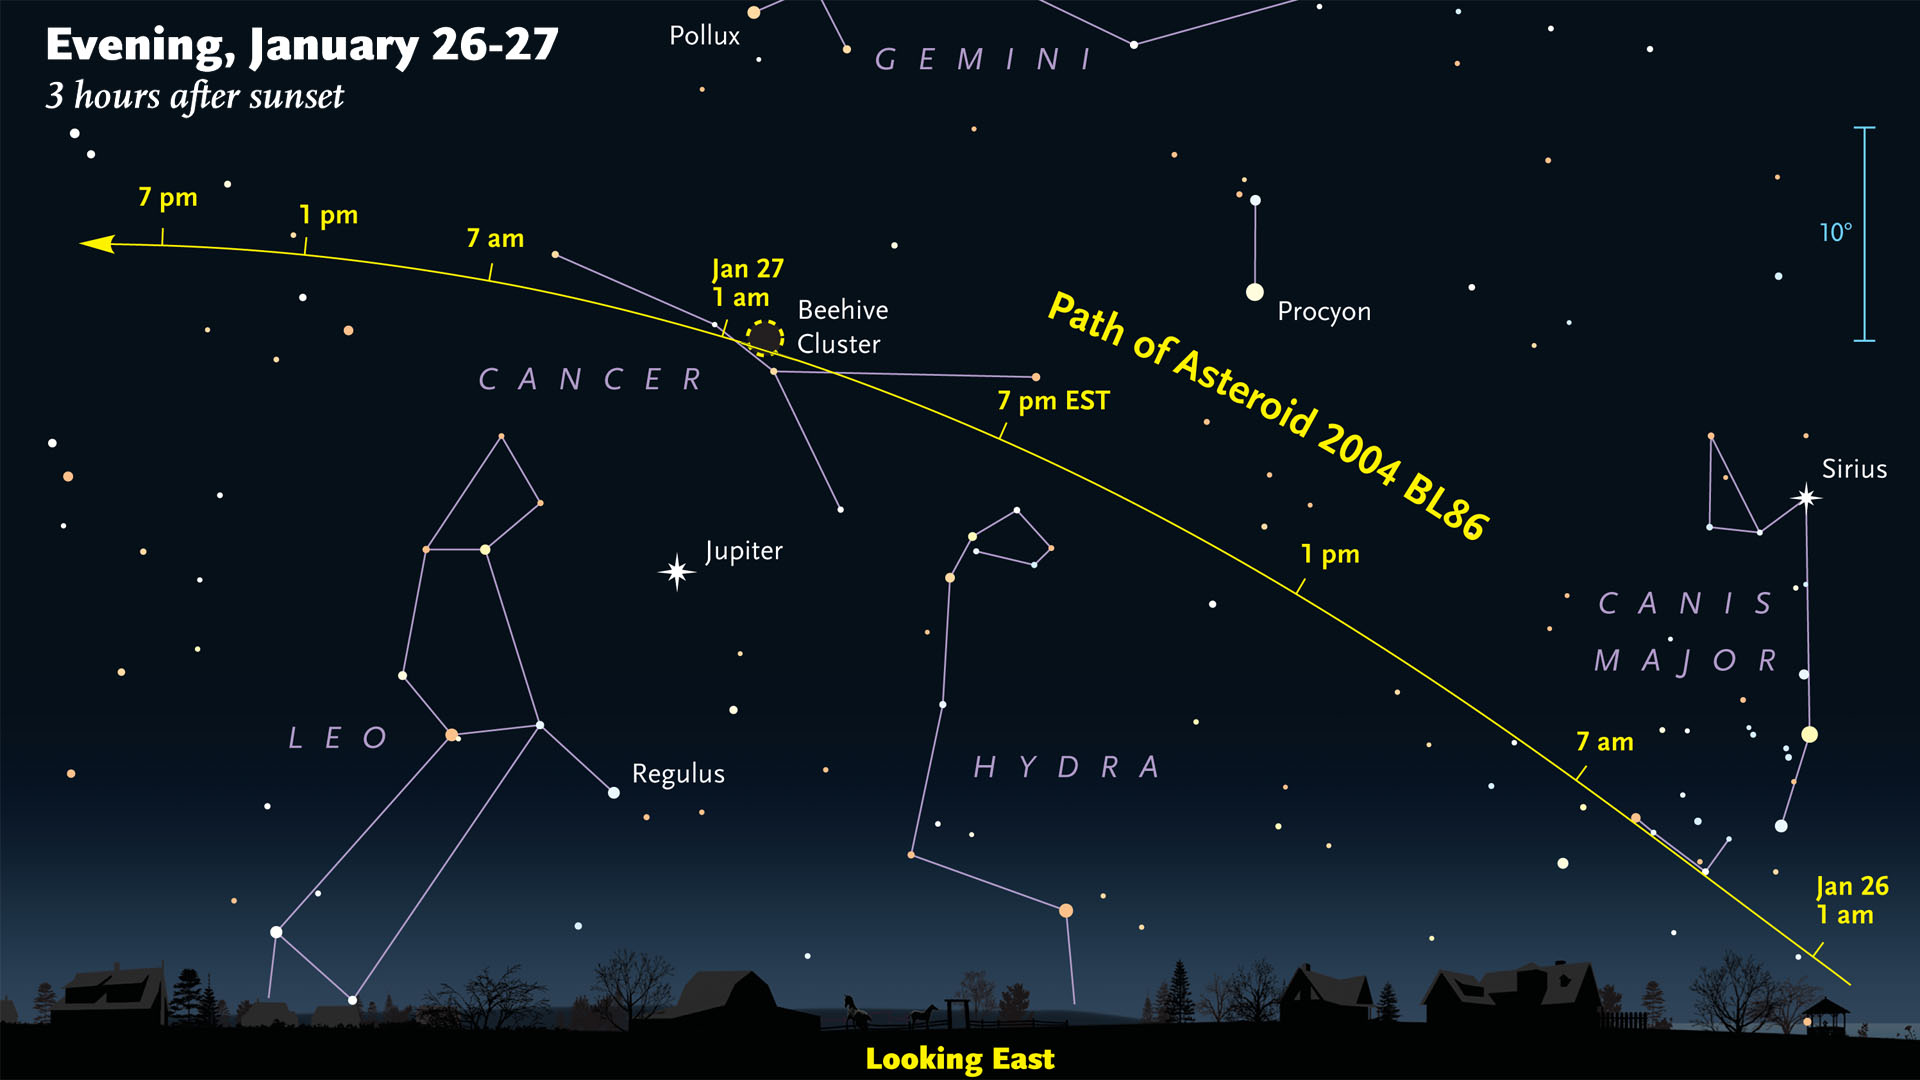 Path of asteroid 2004 BL86 on January 26-27